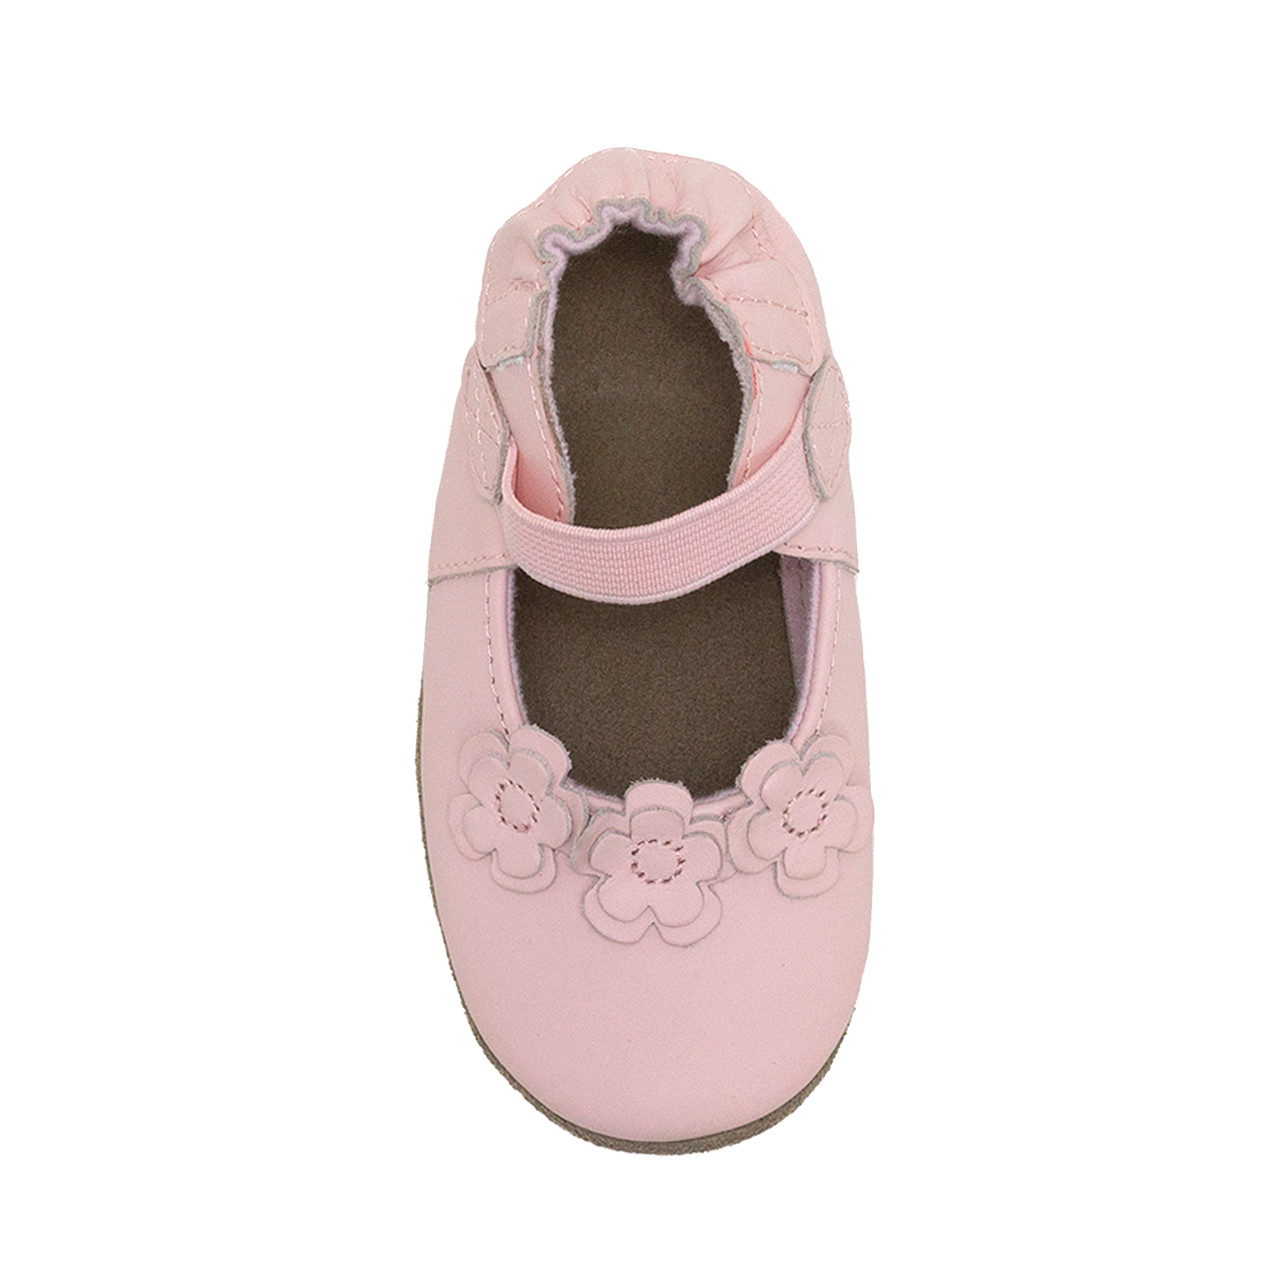 Robeez Child Size 3 Toddler Pink Baby/Walker Shoes